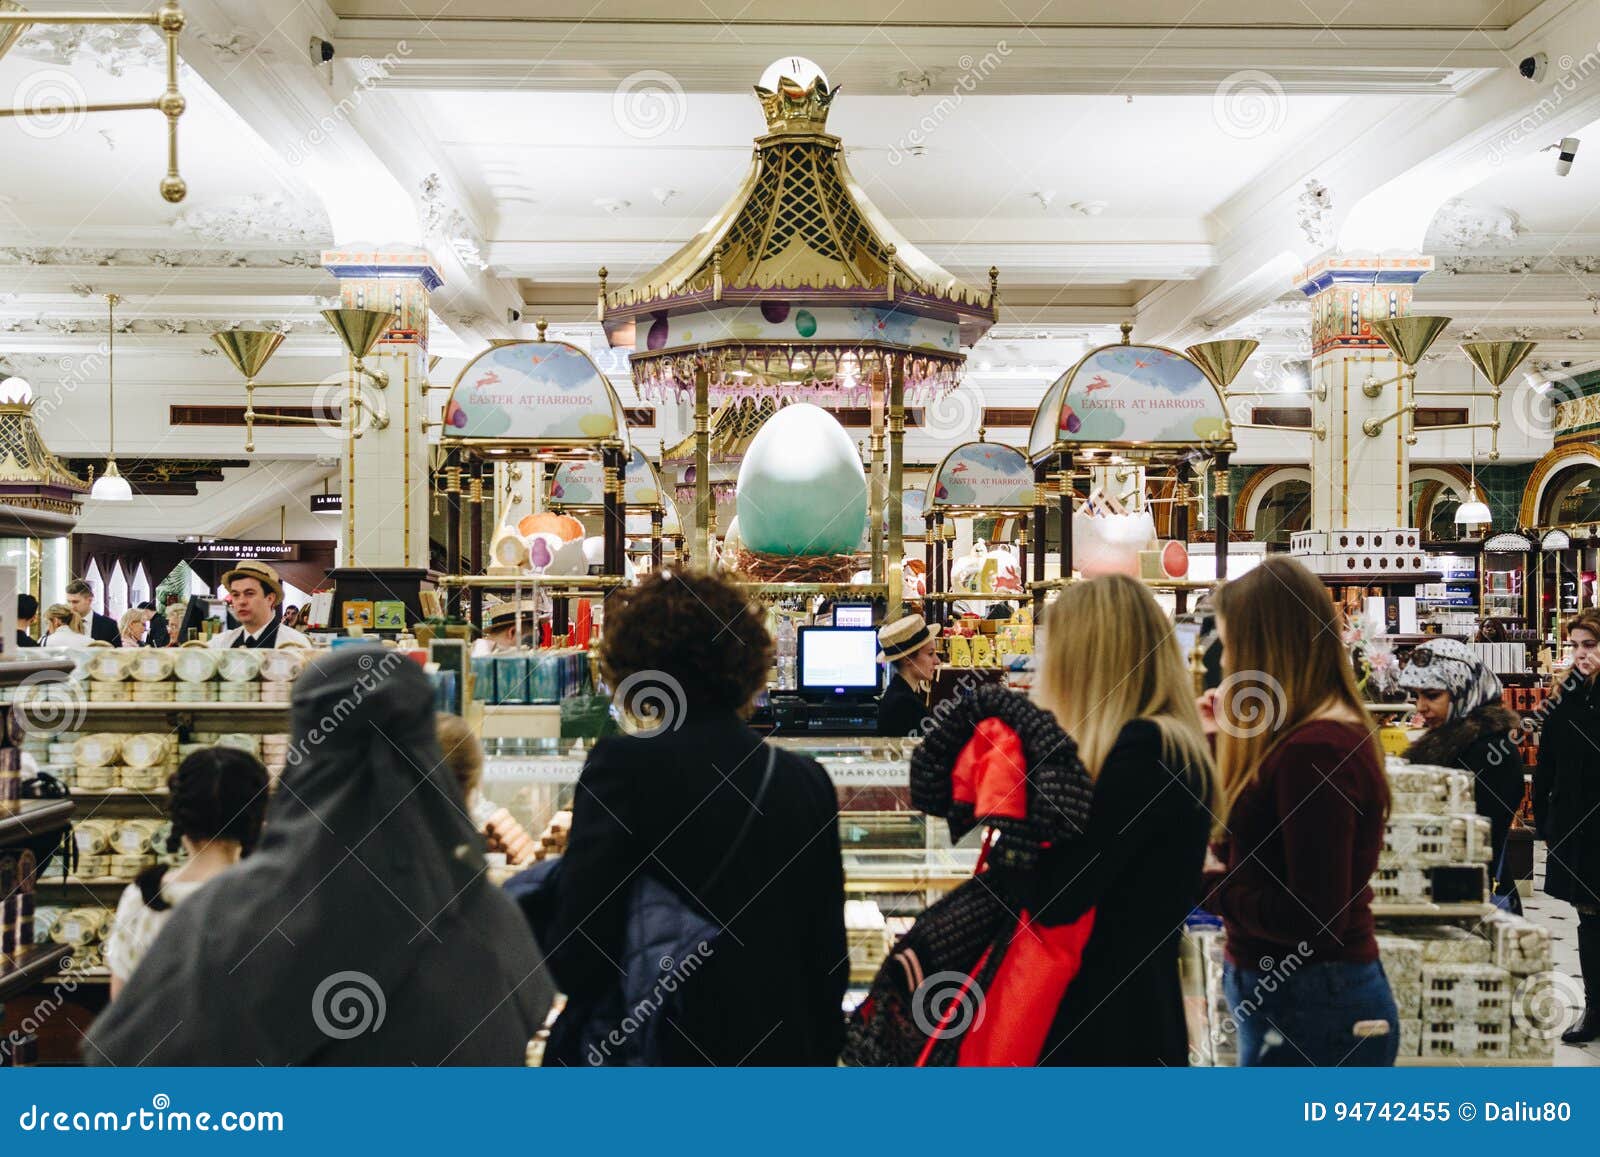 18 Top Places You Can't Miss When Shopping in London | Holidify